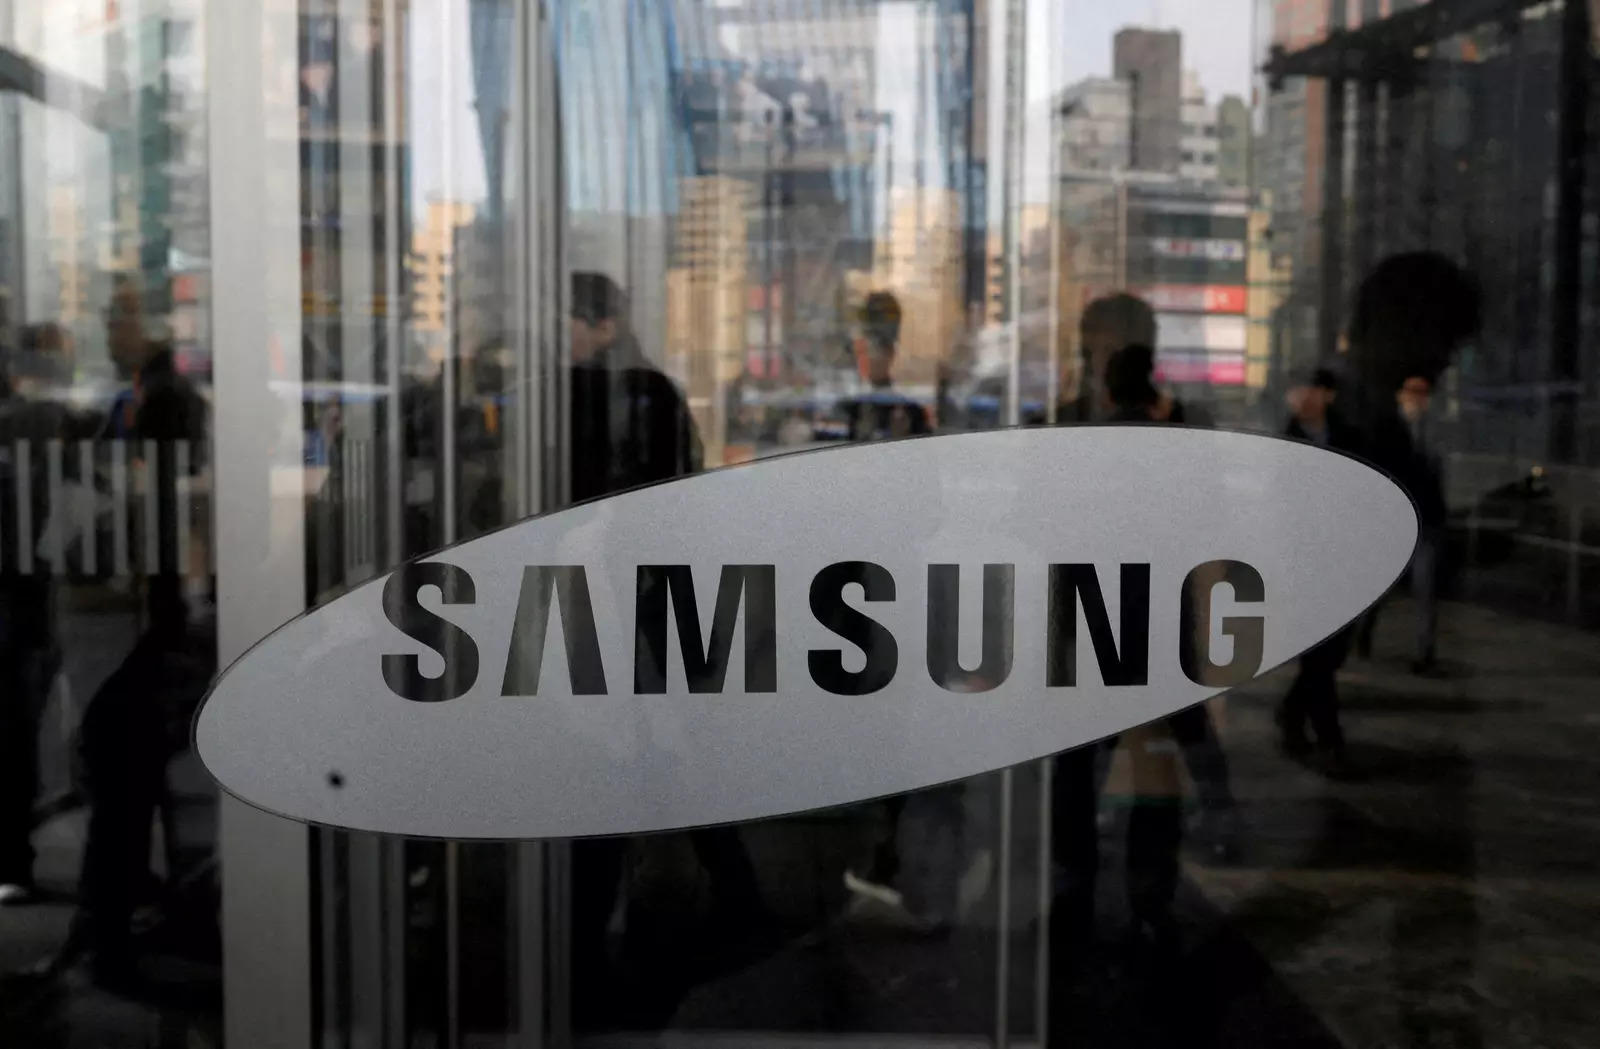 Samsung treats smartphone users data as state secrets Top global executive Image source Reuters